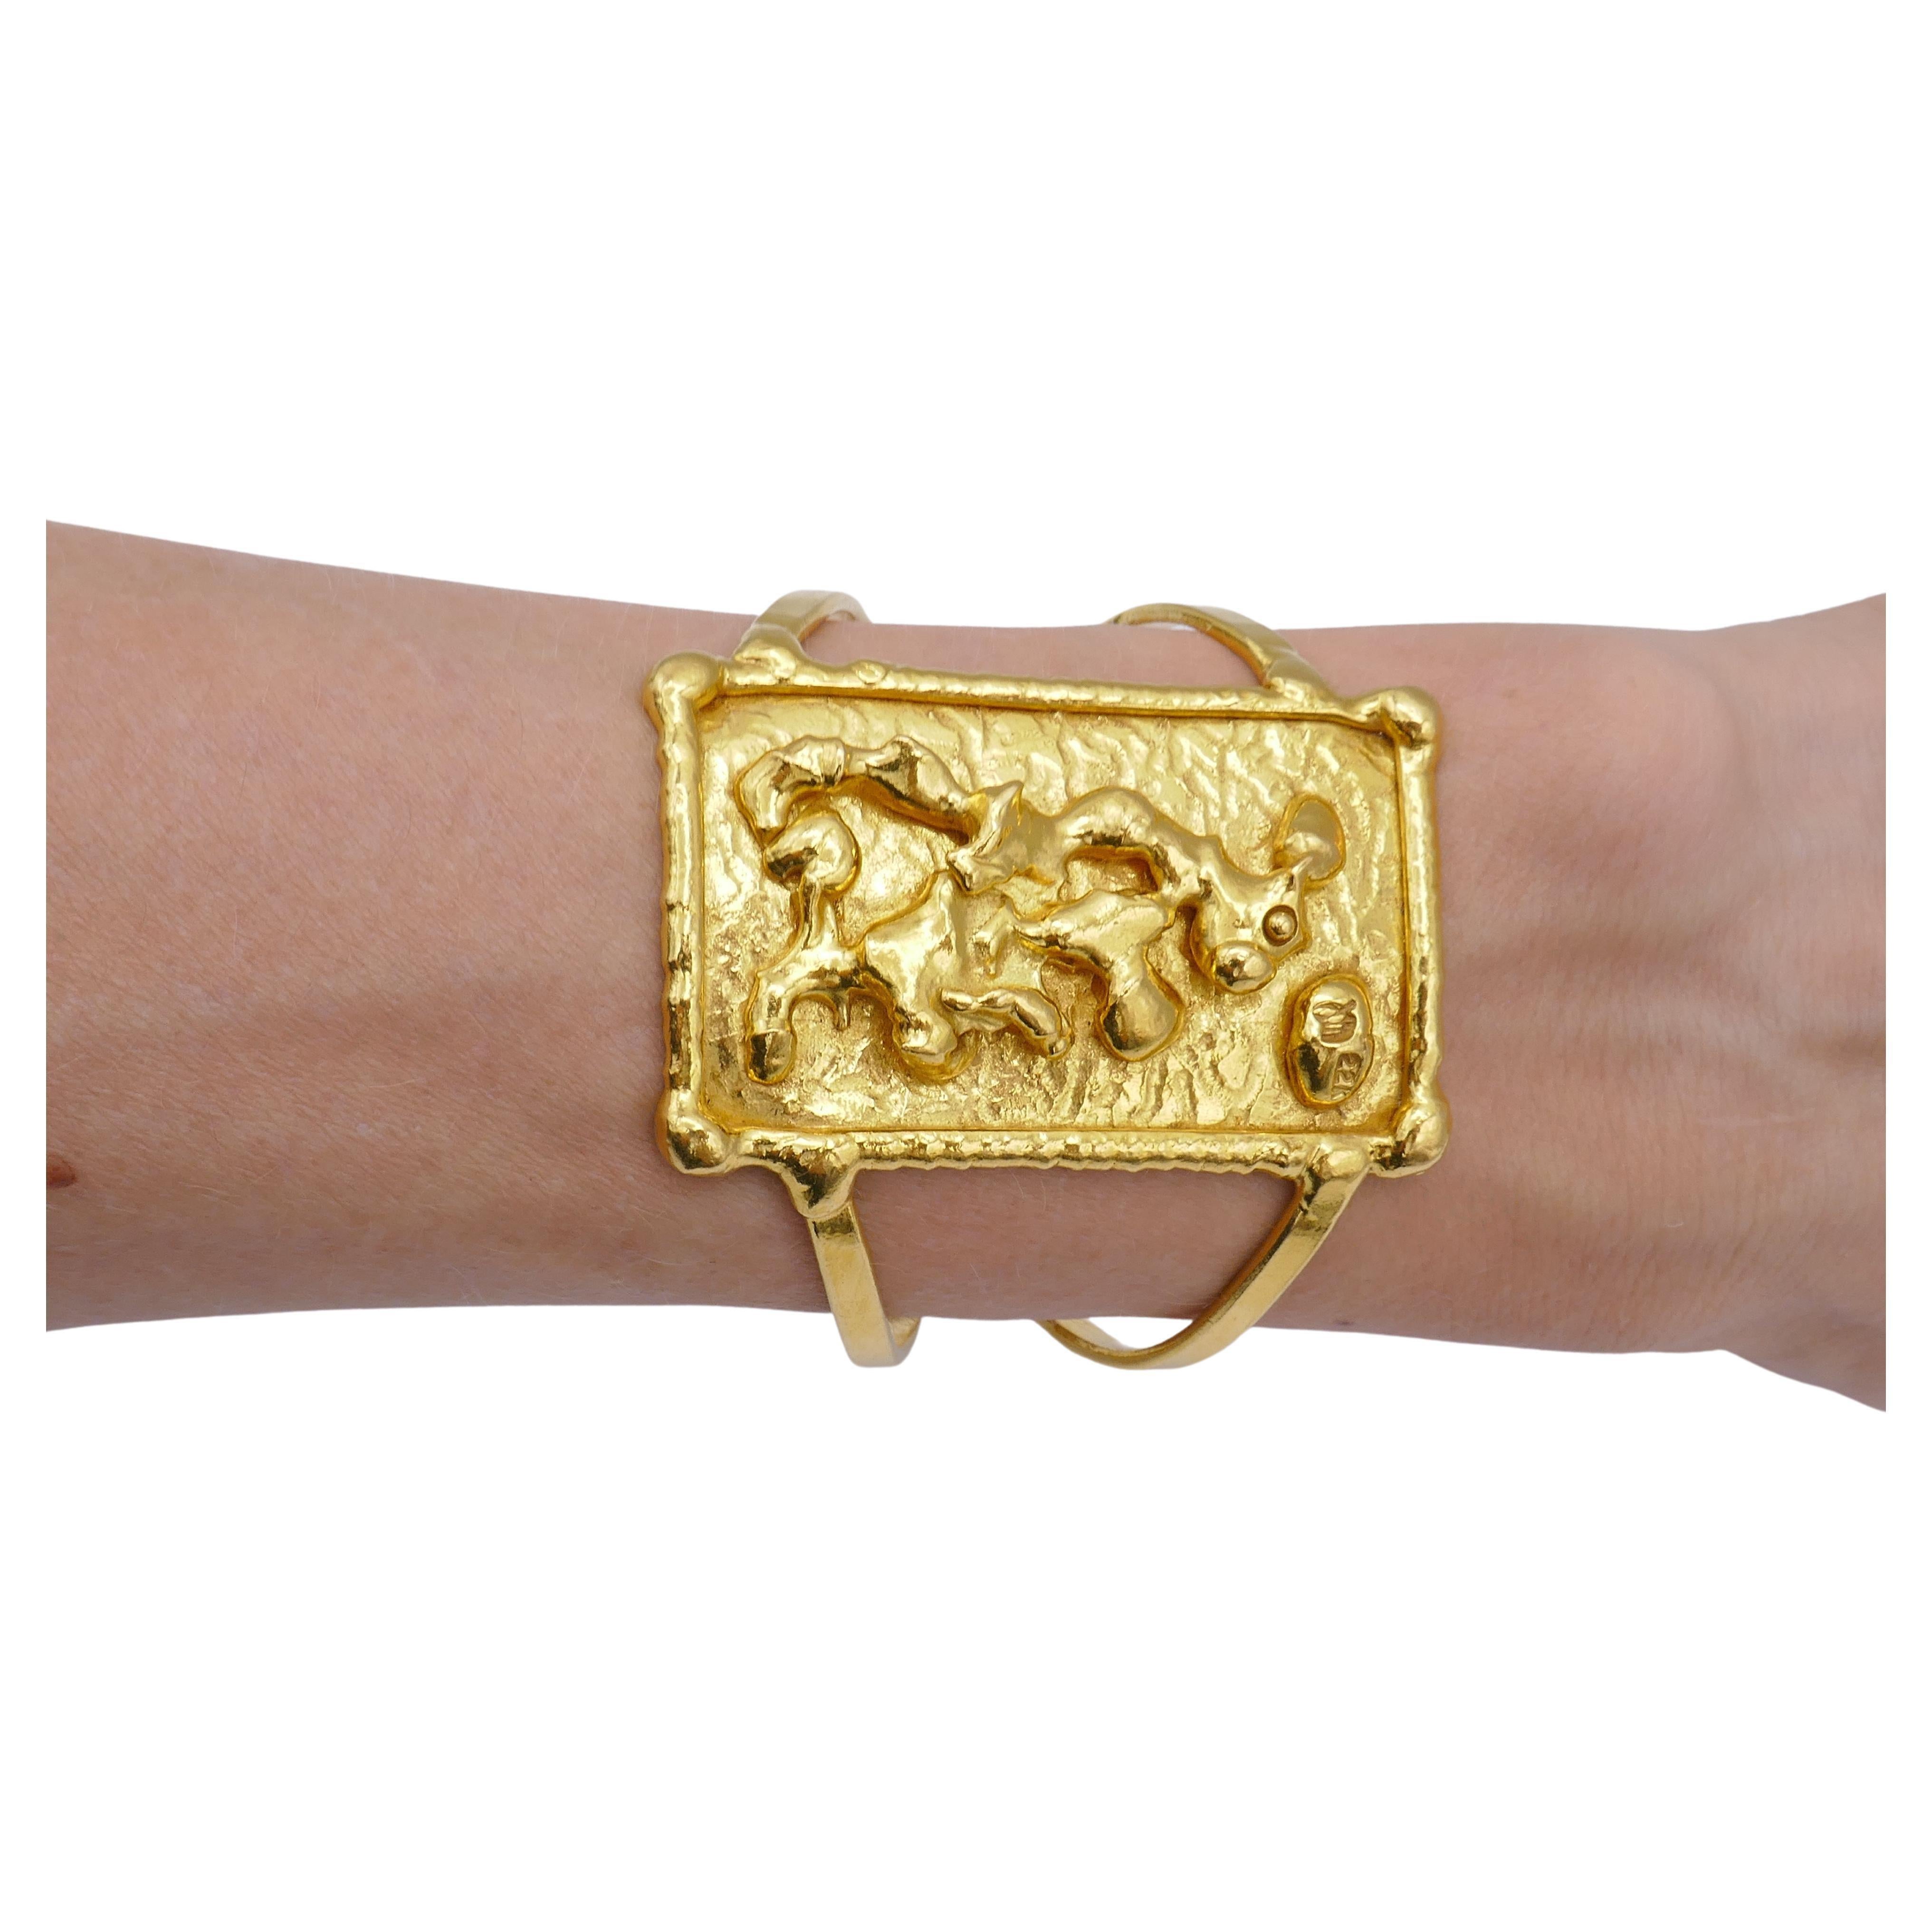 Jean Mahie Cuff Bracelet 22k Gold In Excellent Condition For Sale In Beverly Hills, CA